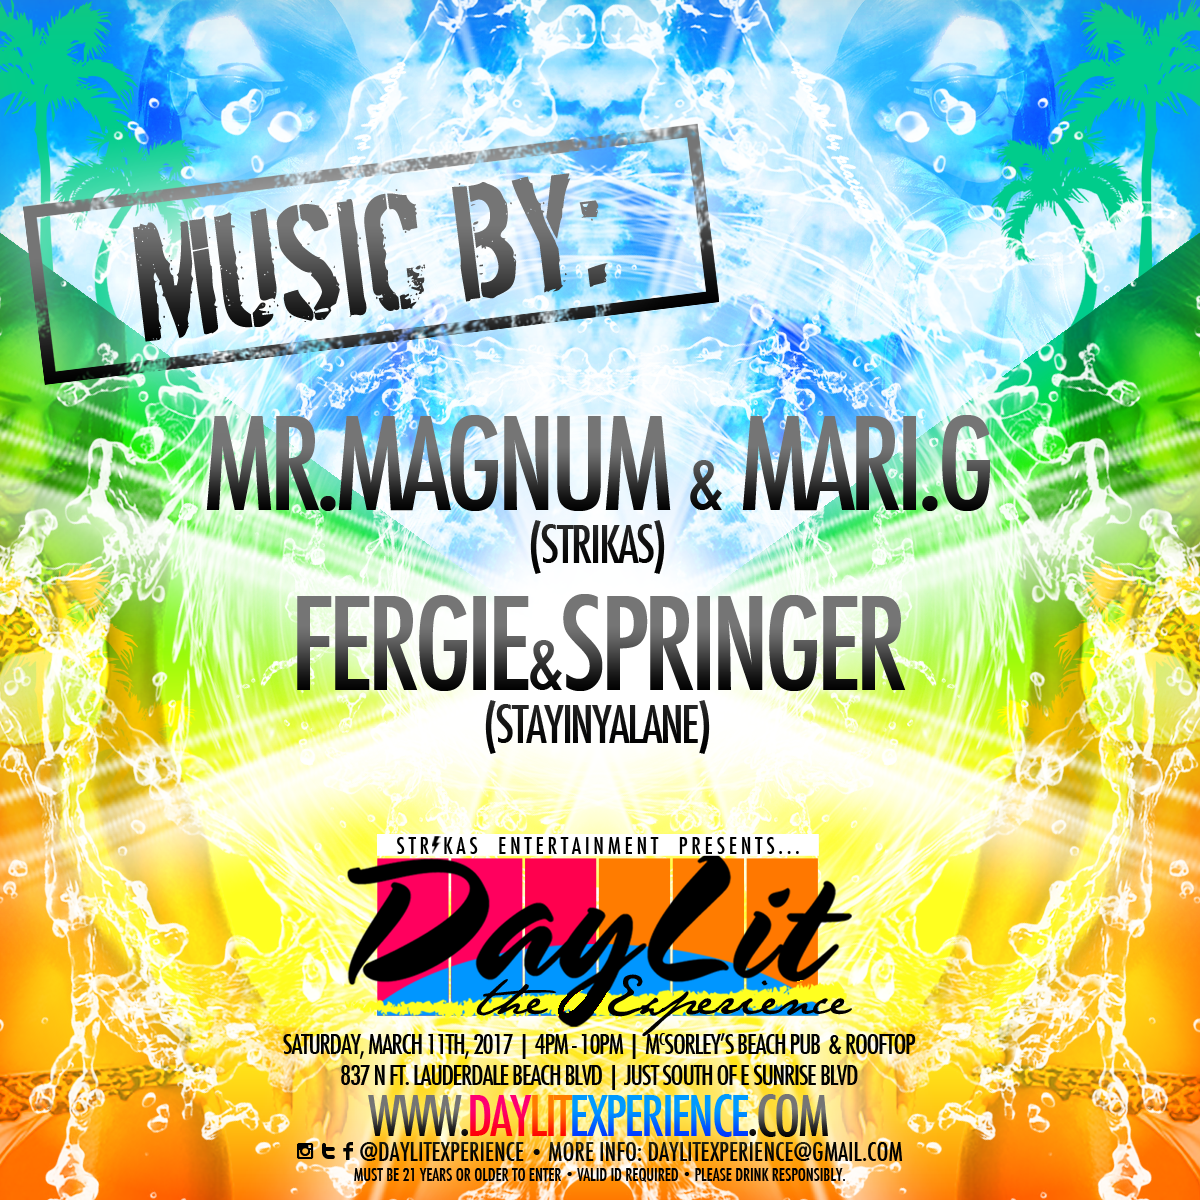 #DayLitExperience, in Ft. Lauderdale, Music Lineup including Gainesville's #1 DJ, Mr. Magnum